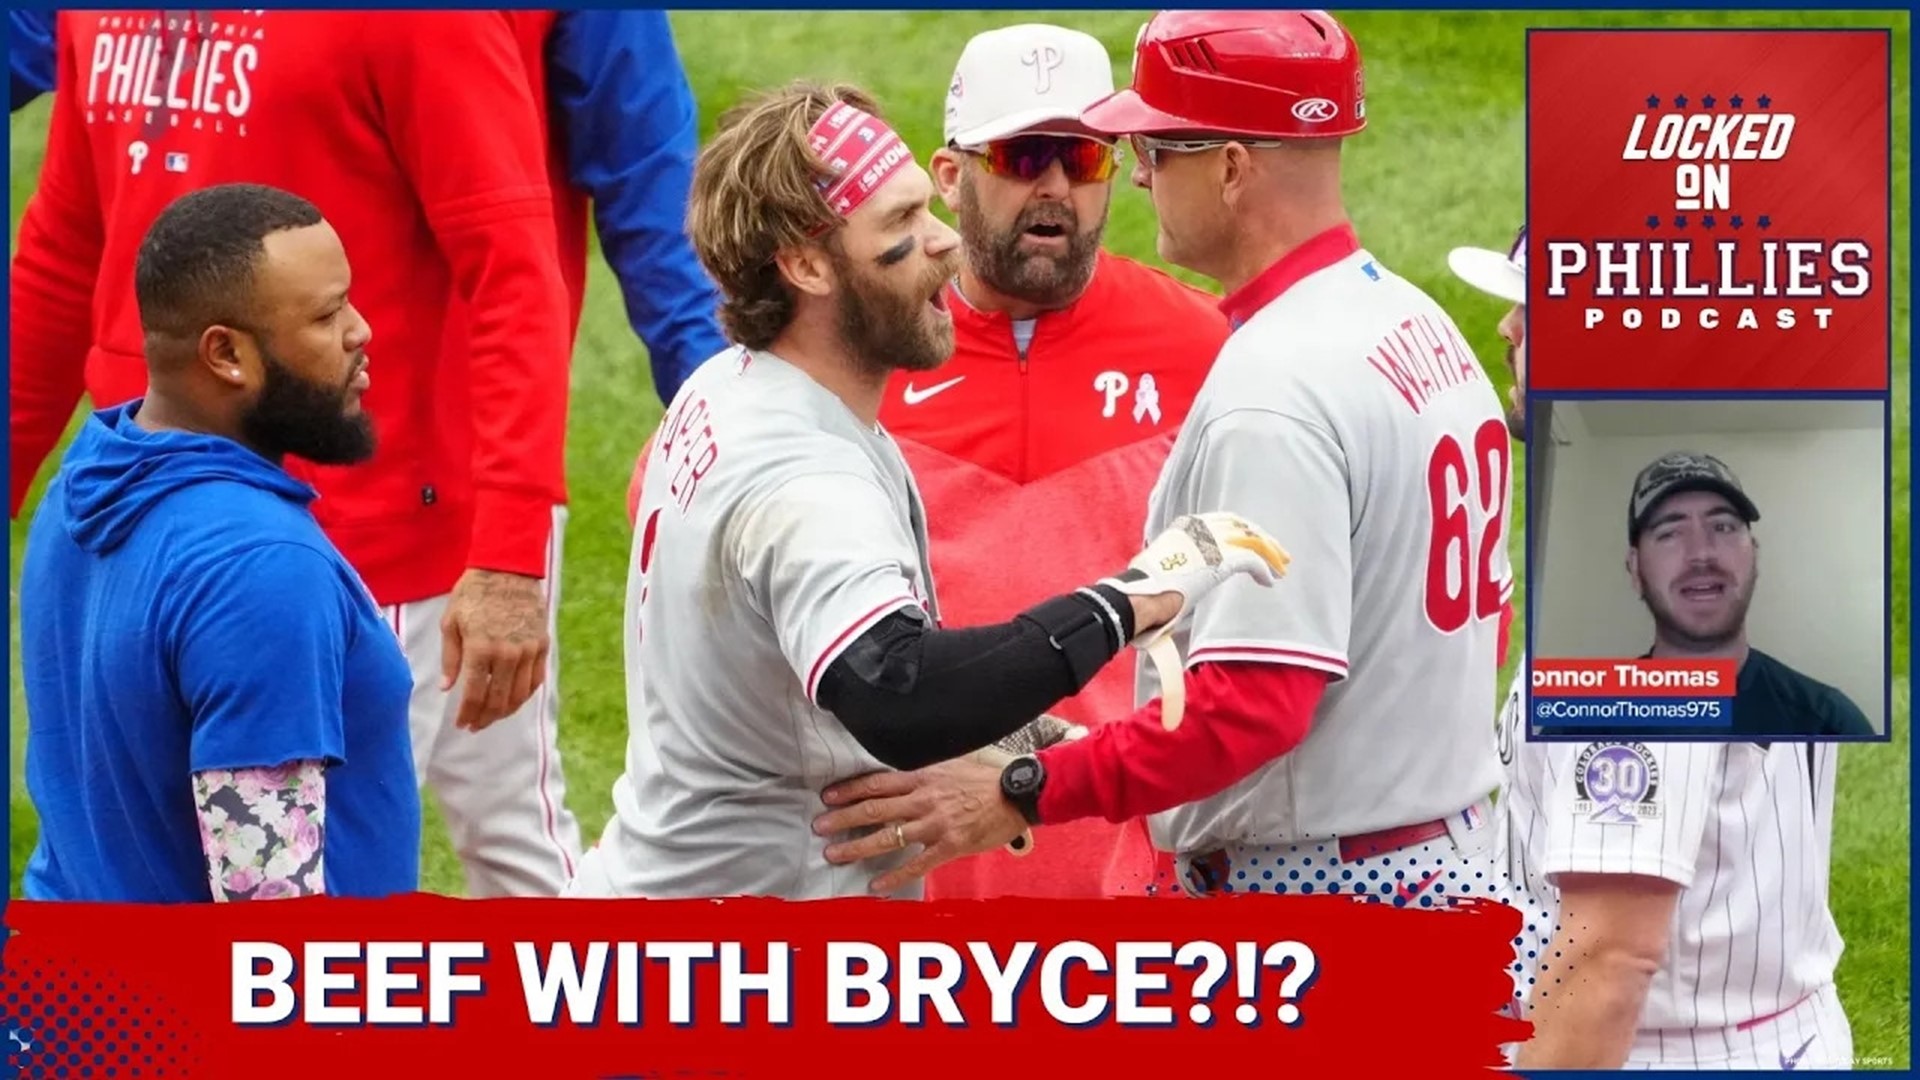 In today's episode, Connor reacts to the Philadelphia Phillies' series against the Colorado Rockies that saw the Philadelphia Phillies take 2 of 3 games.